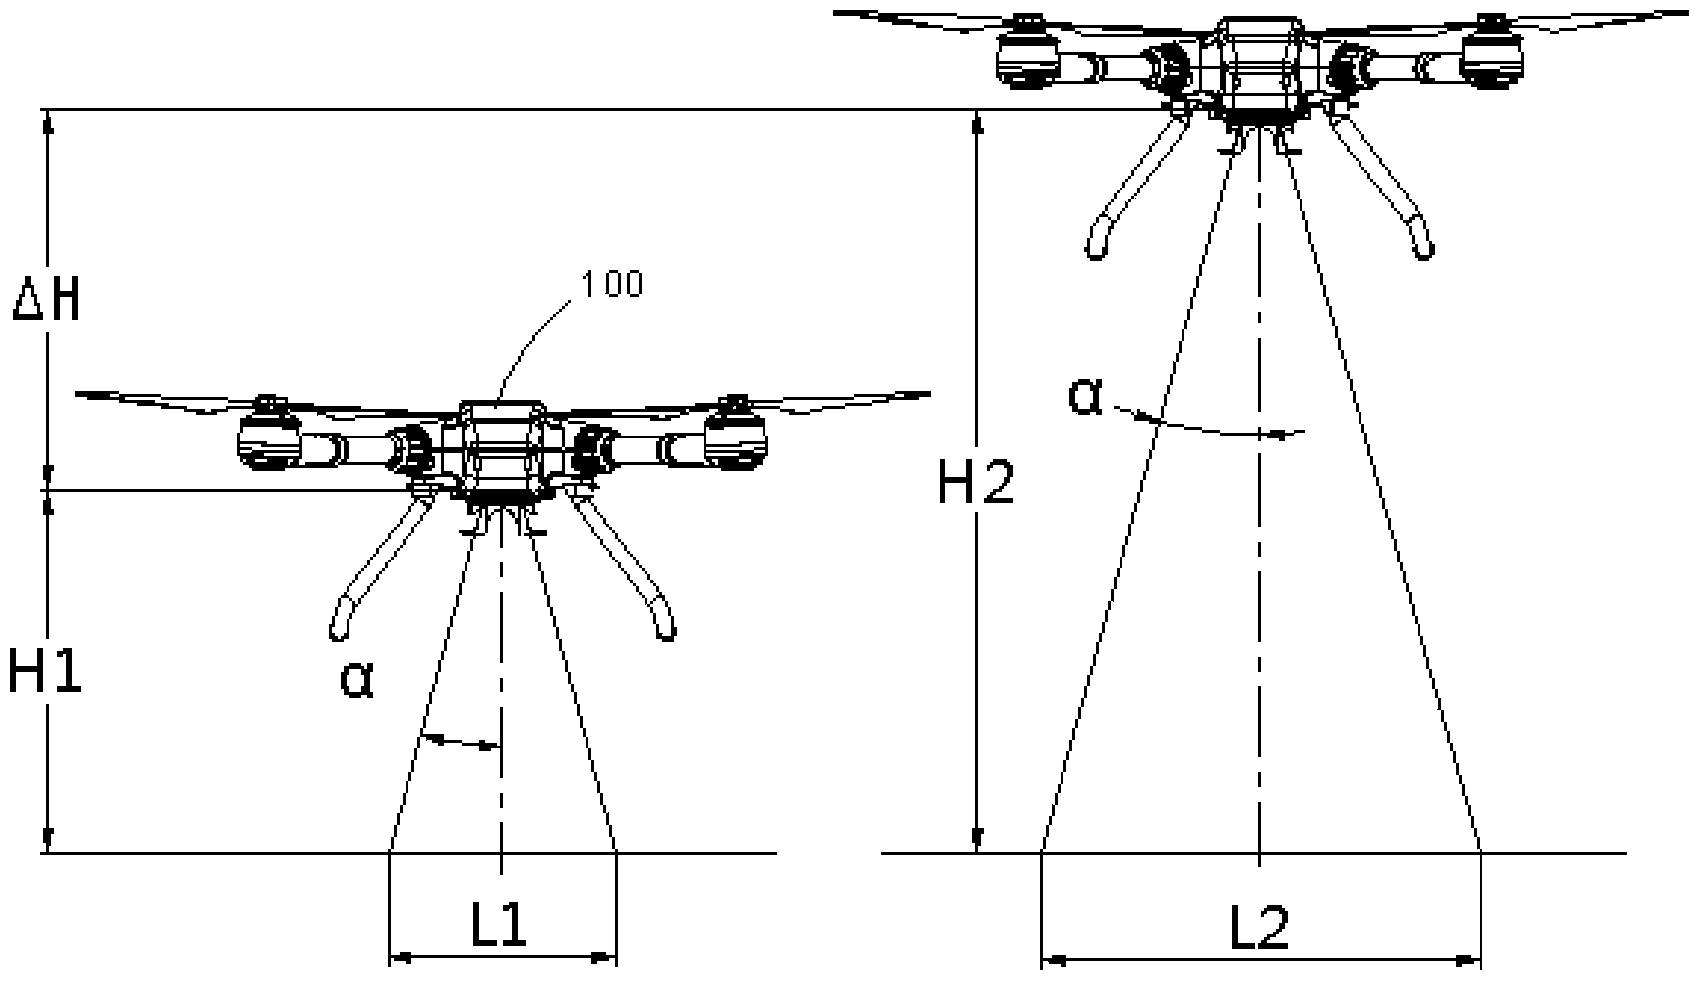 Automatic landing system and method of rotor aircraft